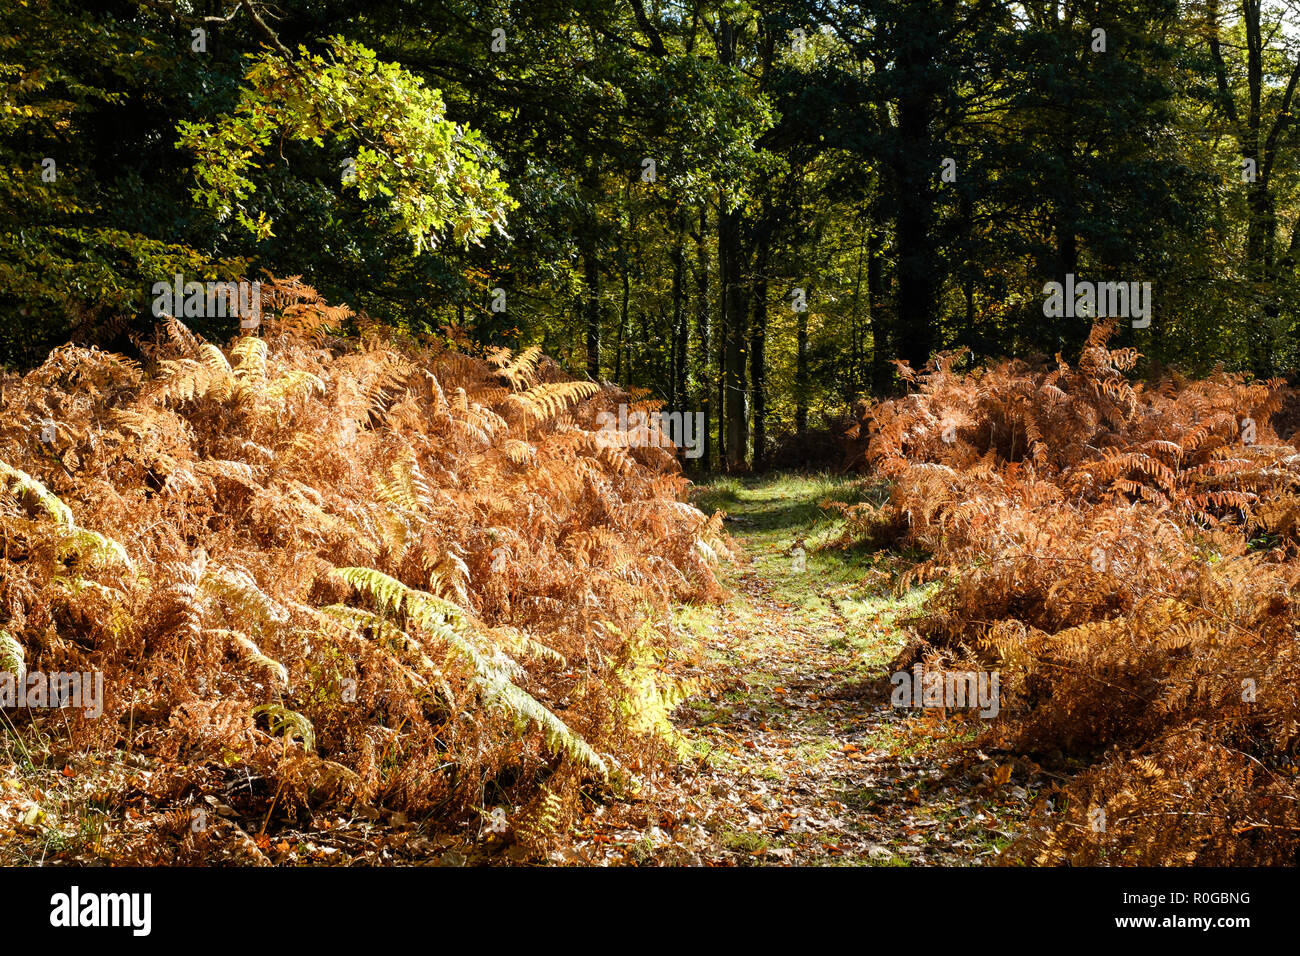 BLAKENEY WOODS THE FOREST OF DEAN IN AUTUMN WITH PATH EDGED WITH AUTUMN BRACKEN IN DAPPLED SUNLIGHT. Stock Photo